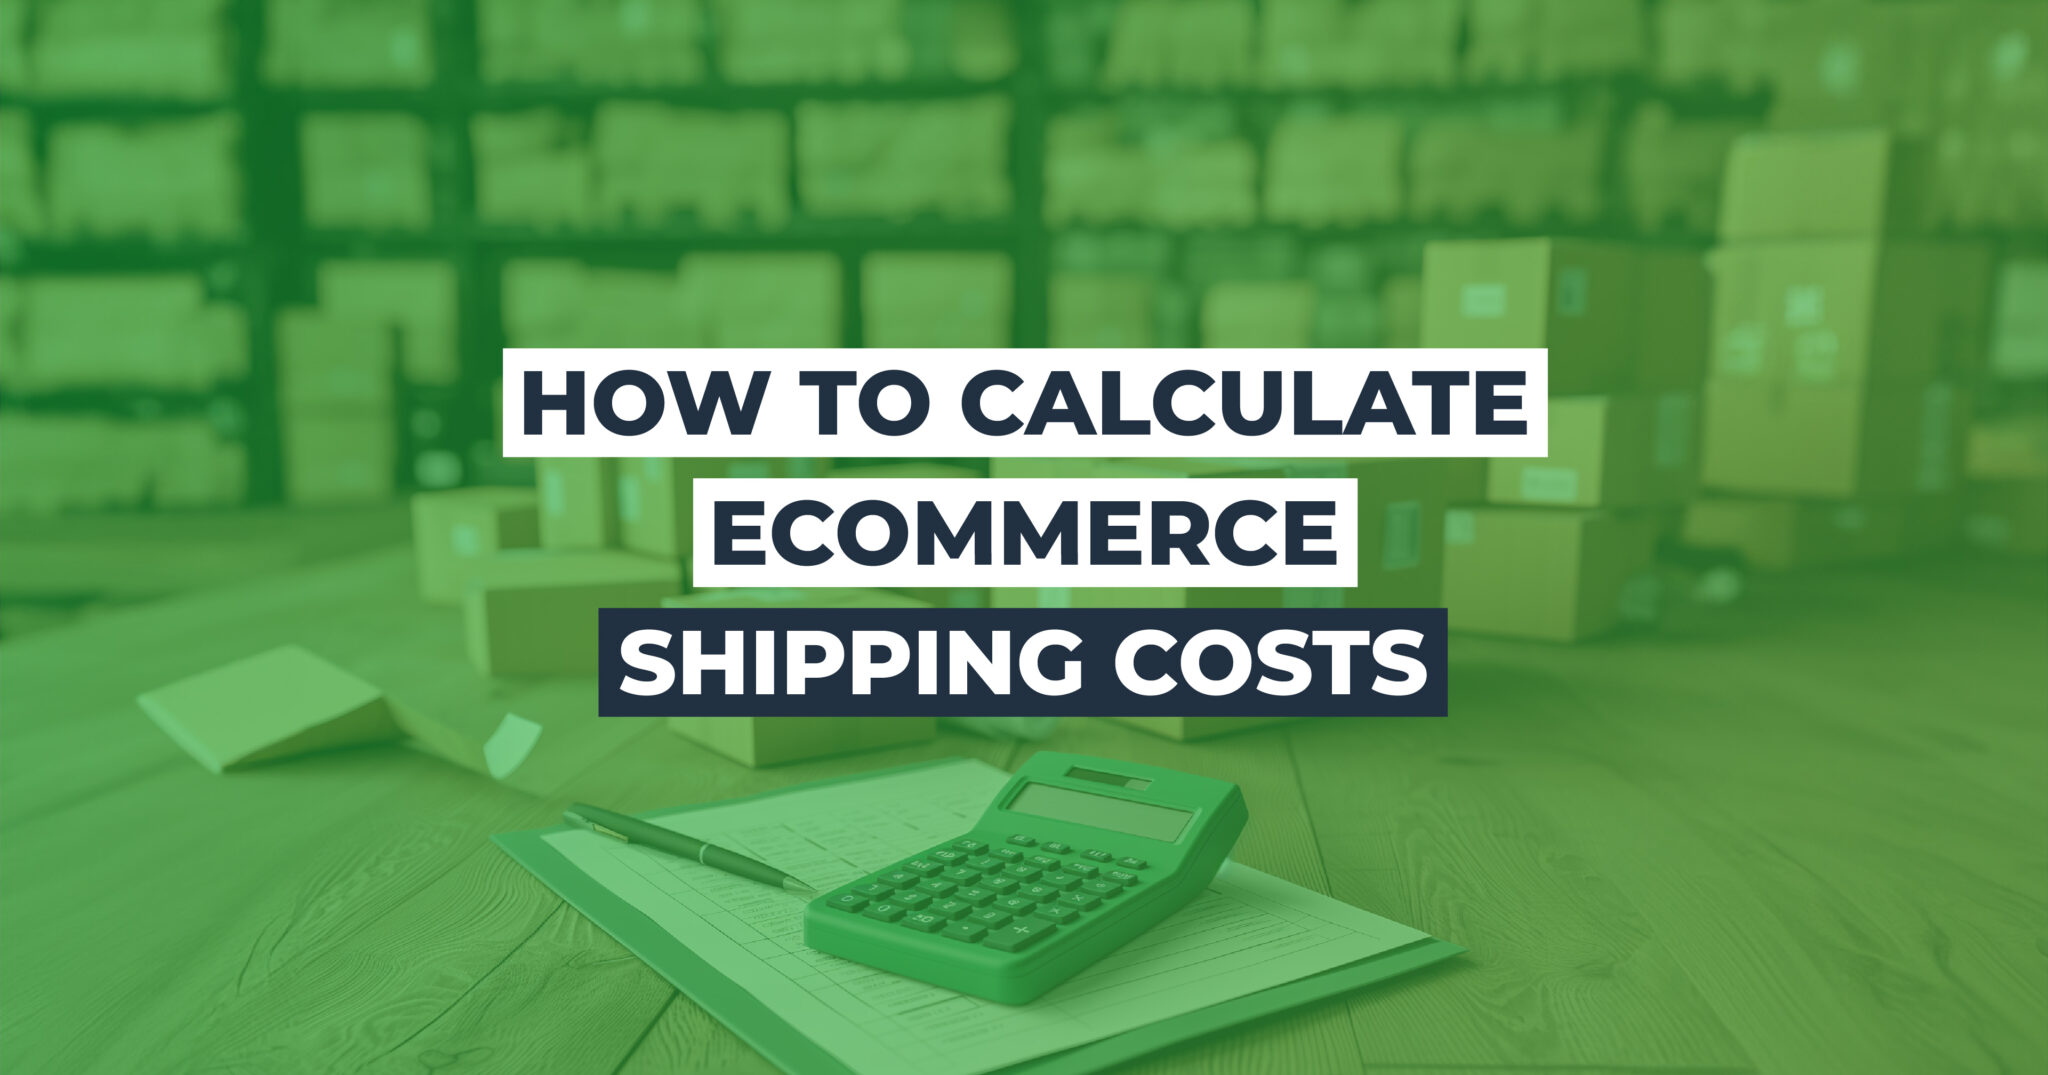 How to Calculate Ecommerce Shipping Costs